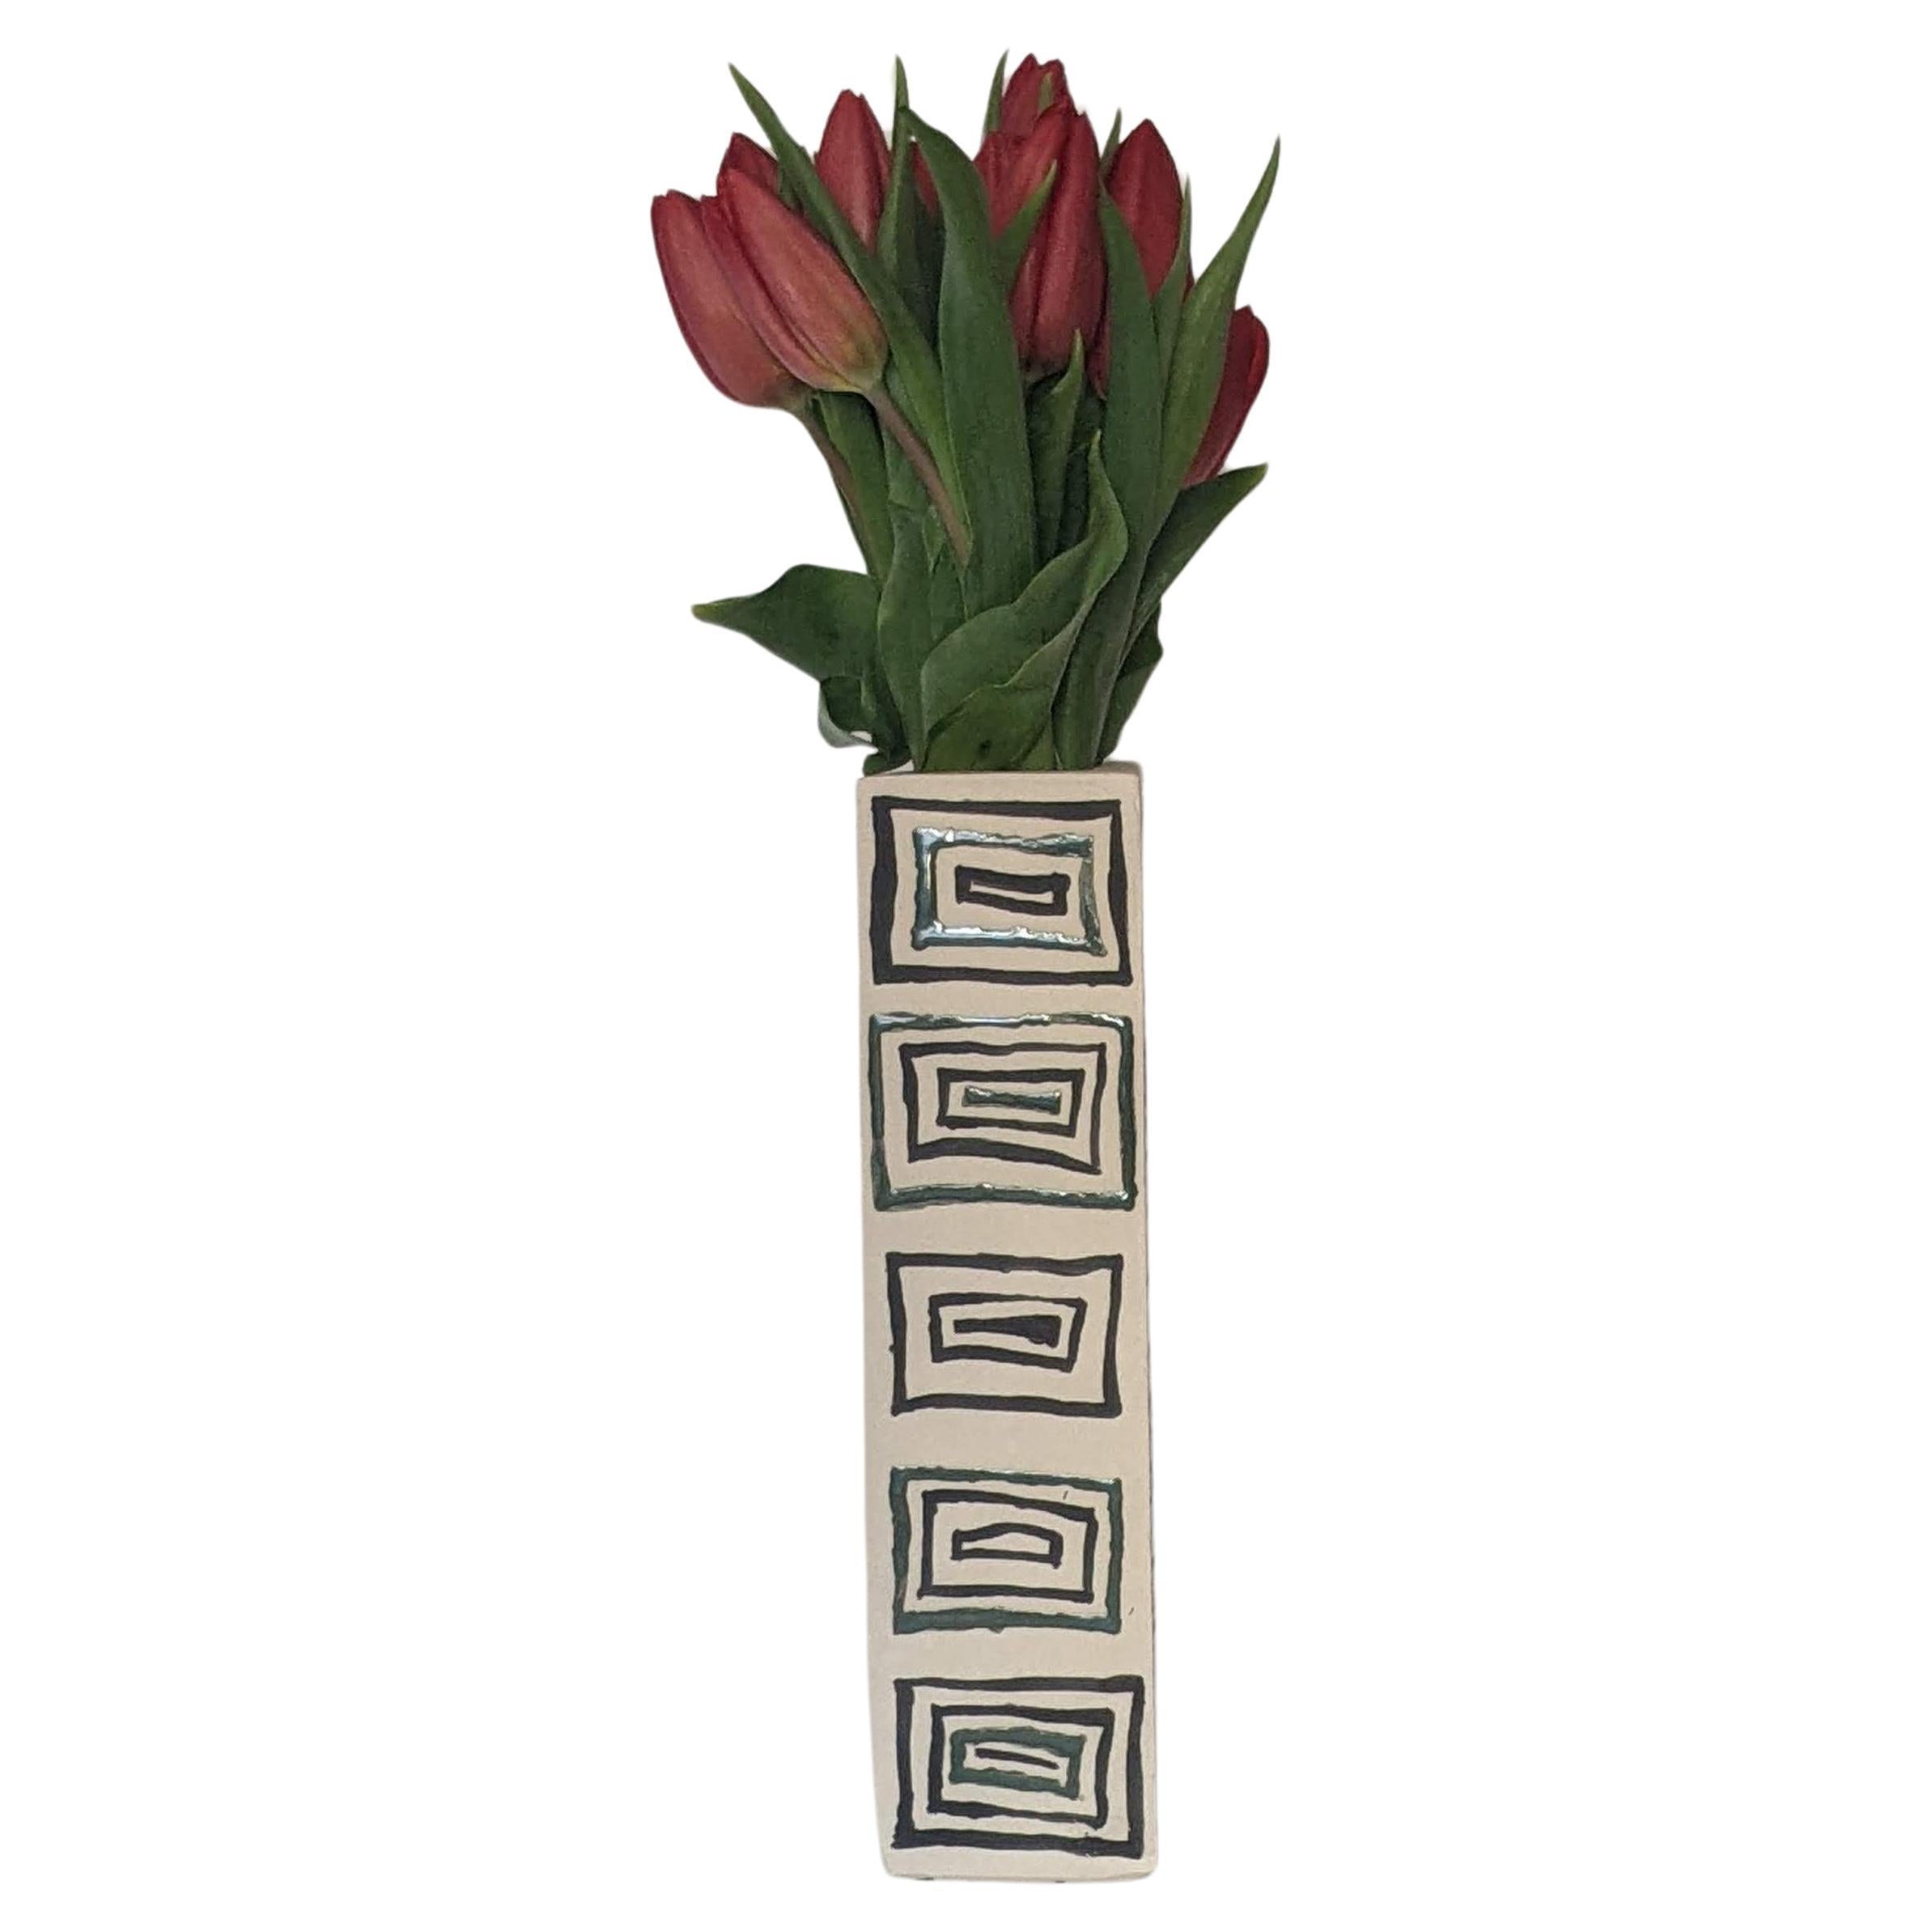 Customizable Hand-crafted Ceramic Vase (Dancing Squares) by James Hicks